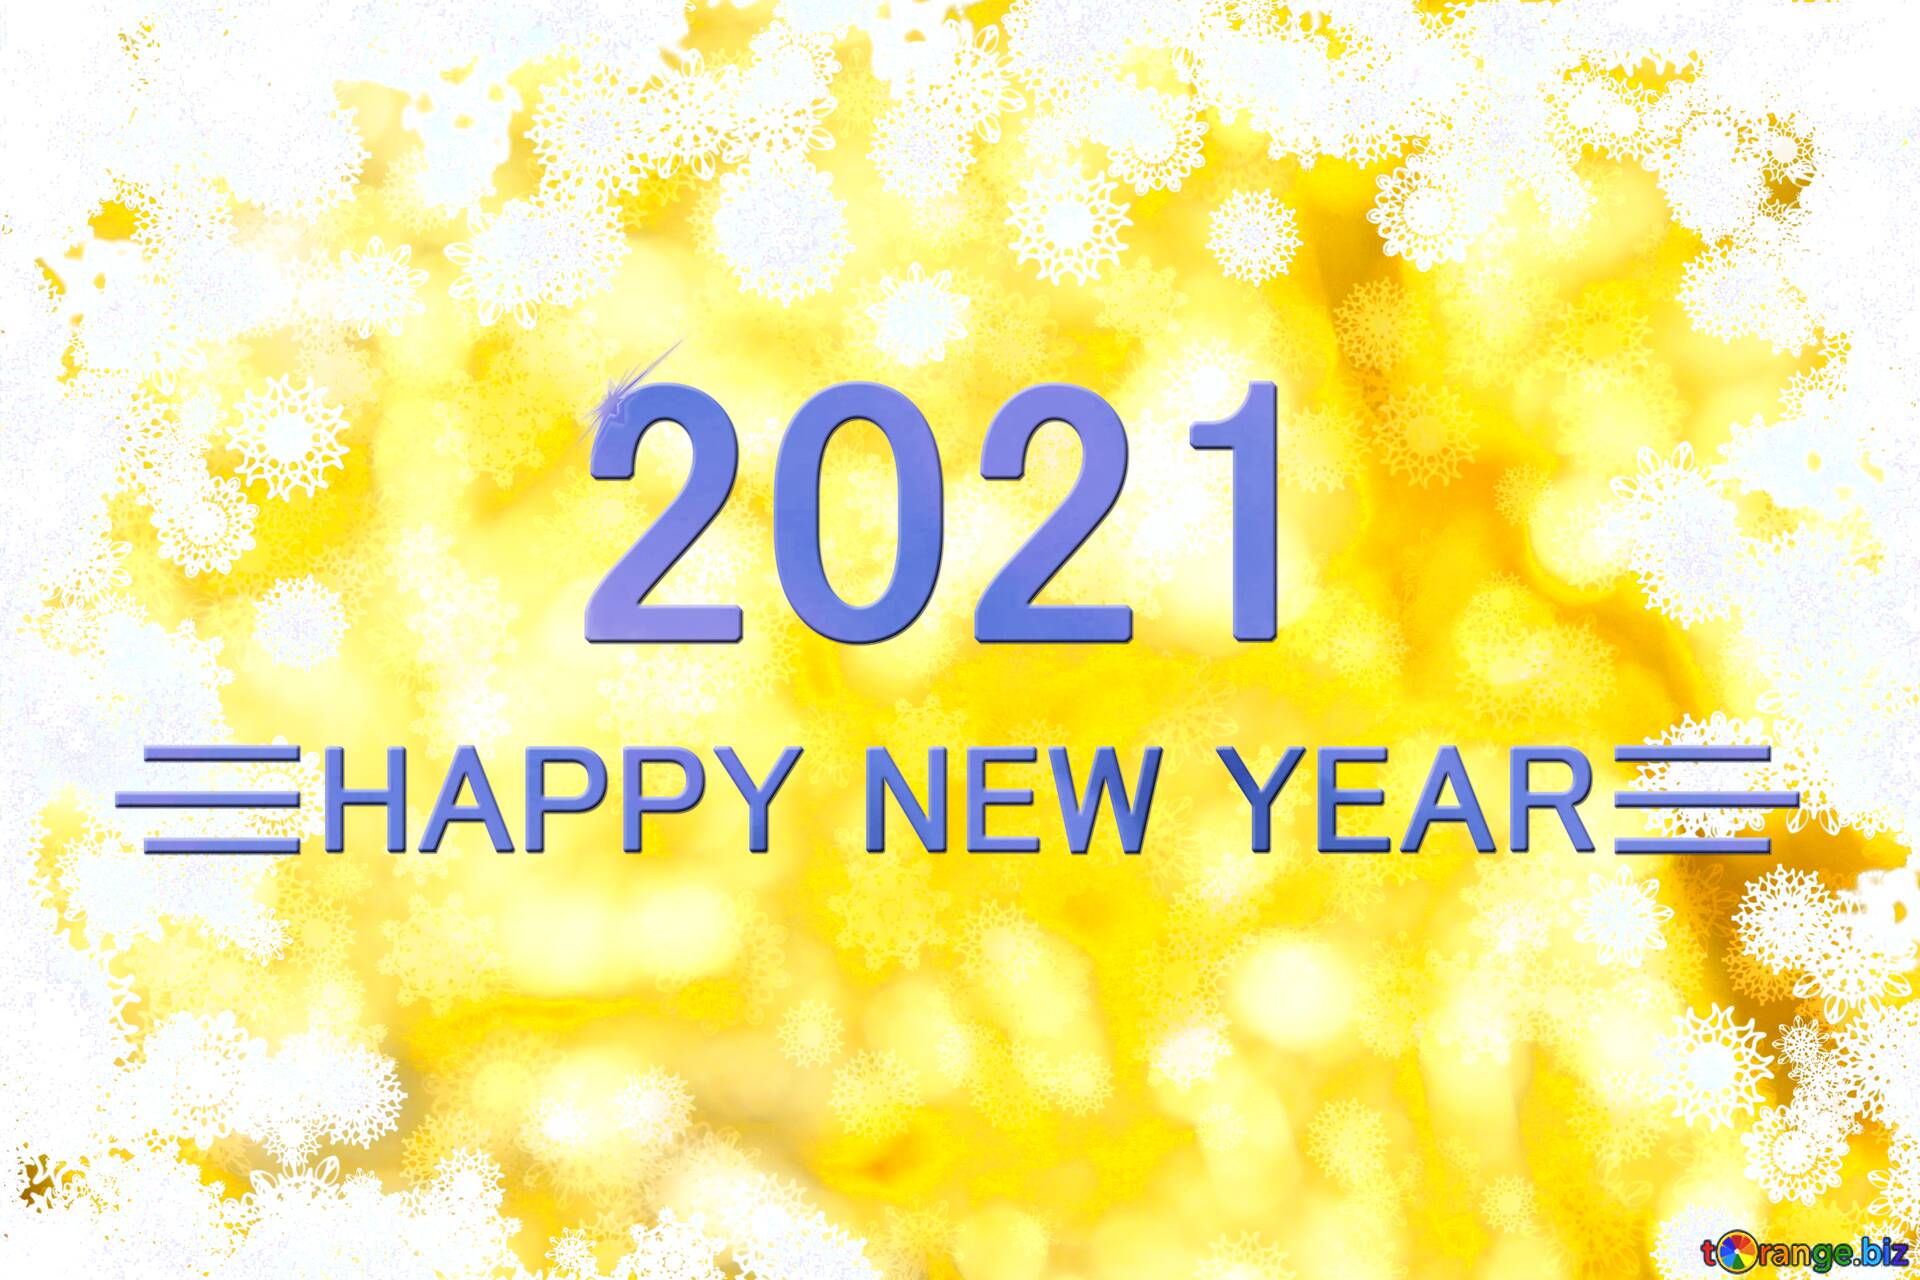 Download free picture New year golden backgrounds Happy New Year 2021 on CC